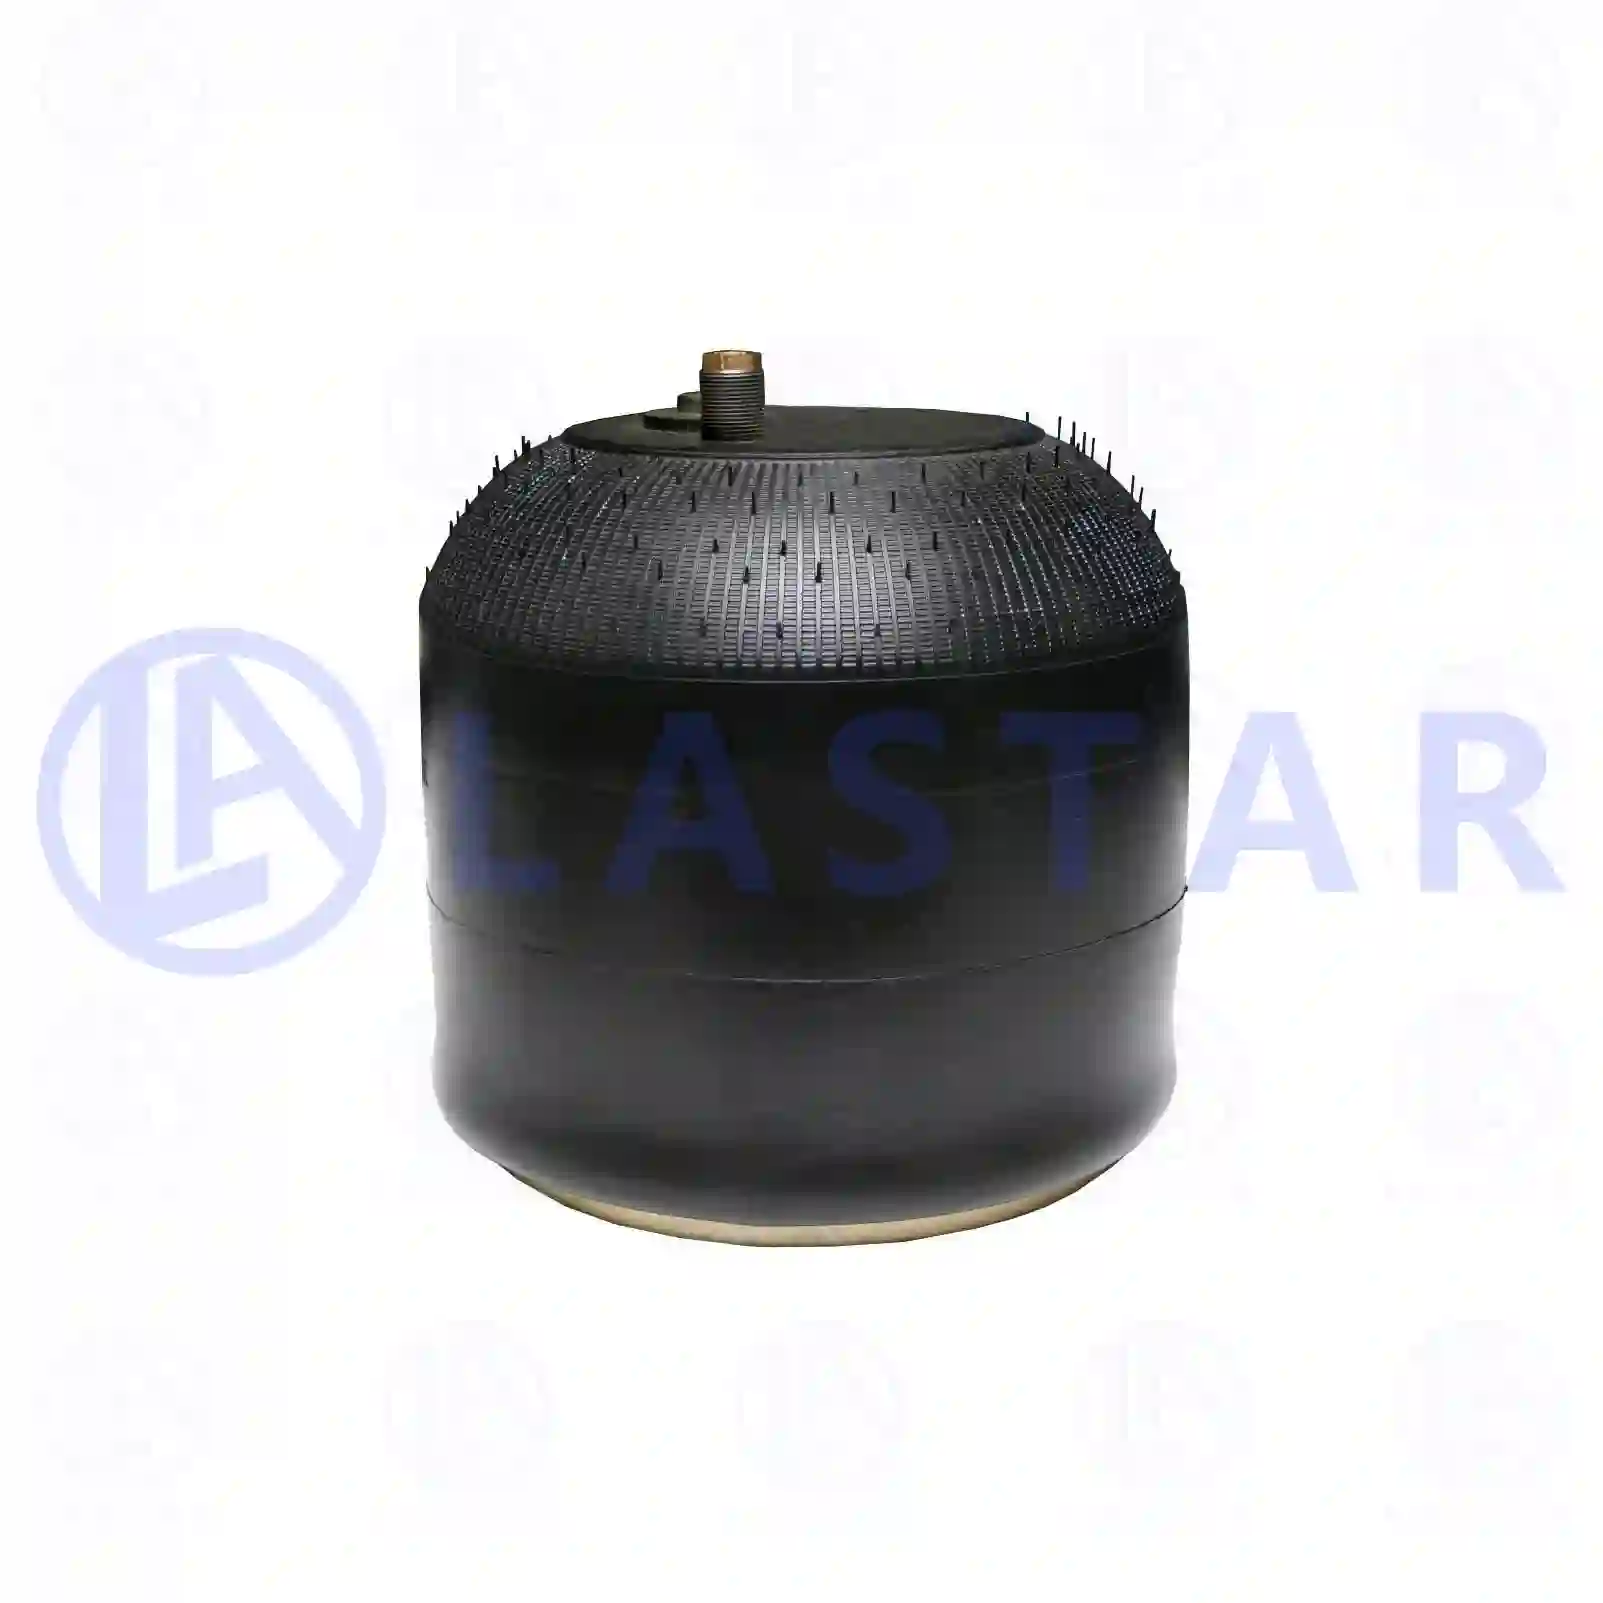 Air spring, with steel piston, 77728186, 9423200557, 9423201421, 9423202321, 9423206921, ZG40772-0008, ||  77728186 Lastar Spare Part | Truck Spare Parts, Auotomotive Spare Parts Air spring, with steel piston, 77728186, 9423200557, 9423201421, 9423202321, 9423206921, ZG40772-0008, ||  77728186 Lastar Spare Part | Truck Spare Parts, Auotomotive Spare Parts